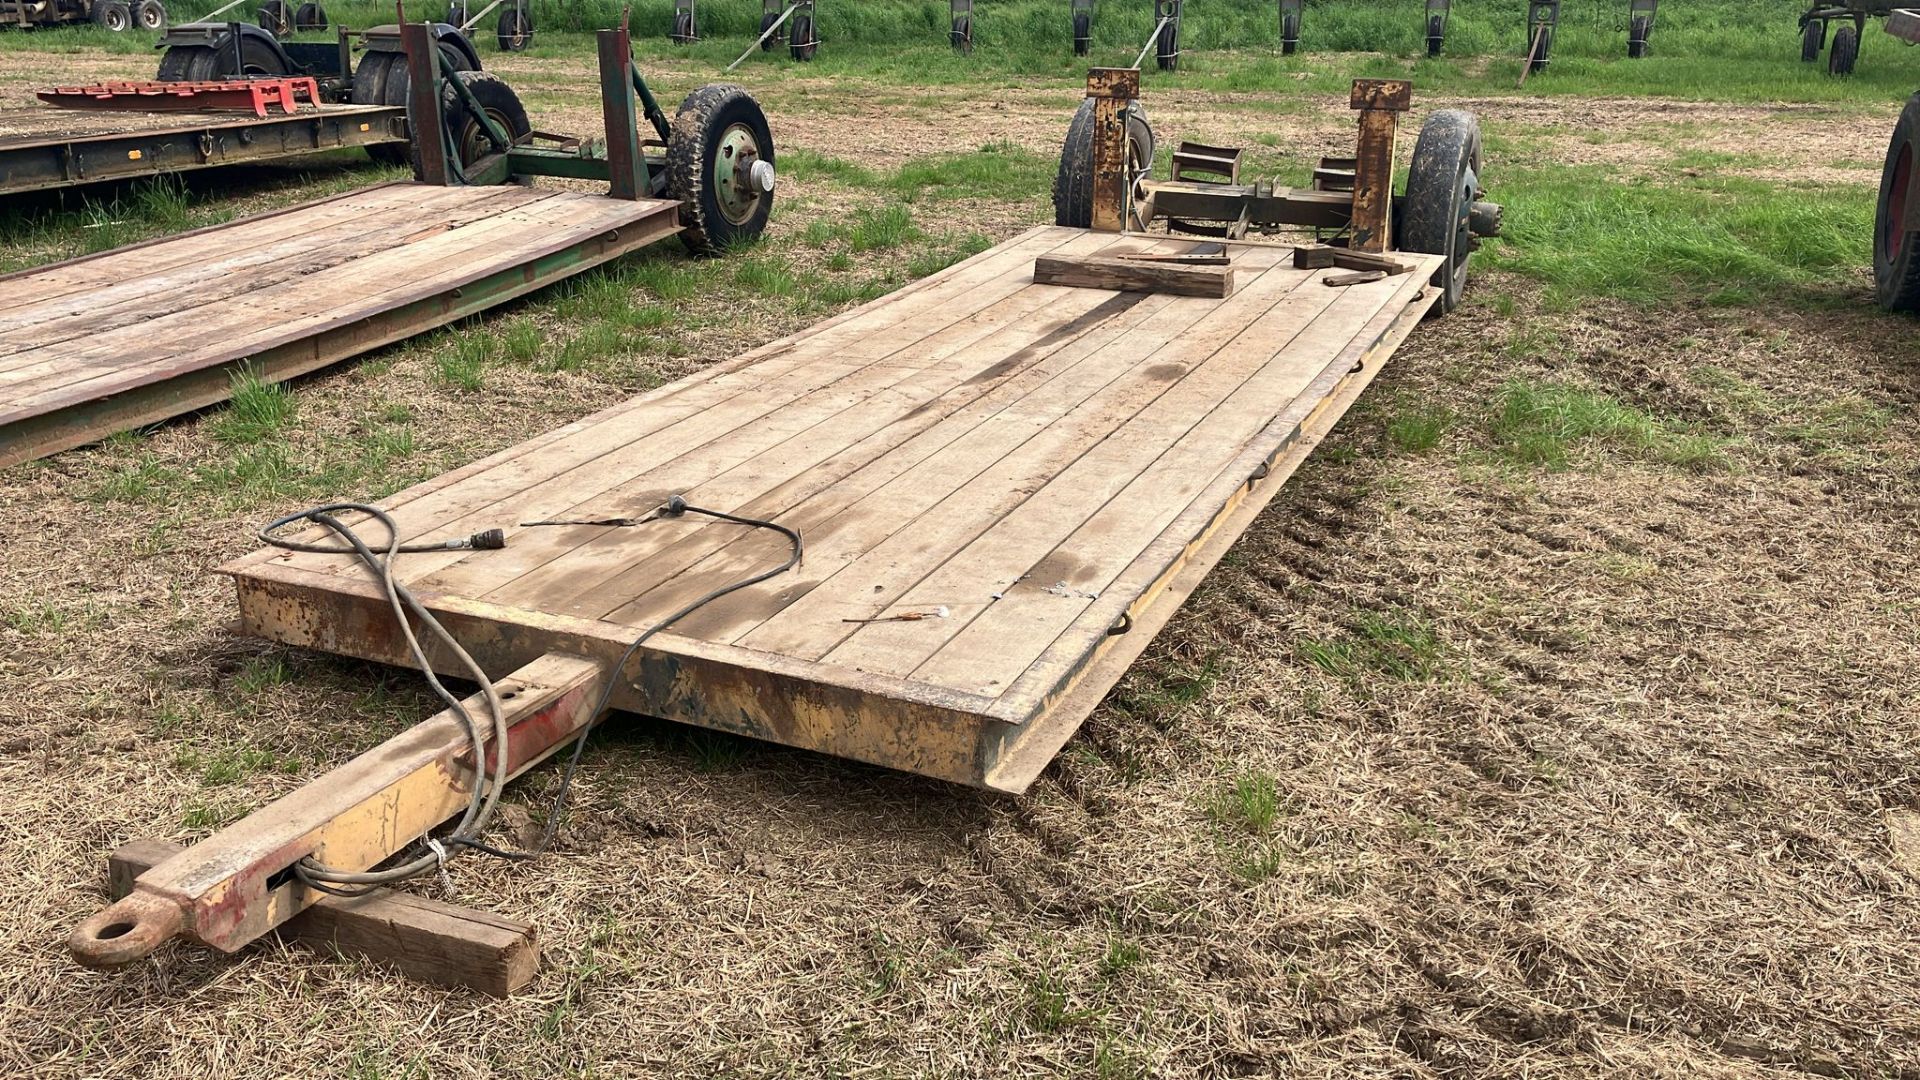 Drop deck low loader 5.2m long x 2m, farm made - Image 2 of 2